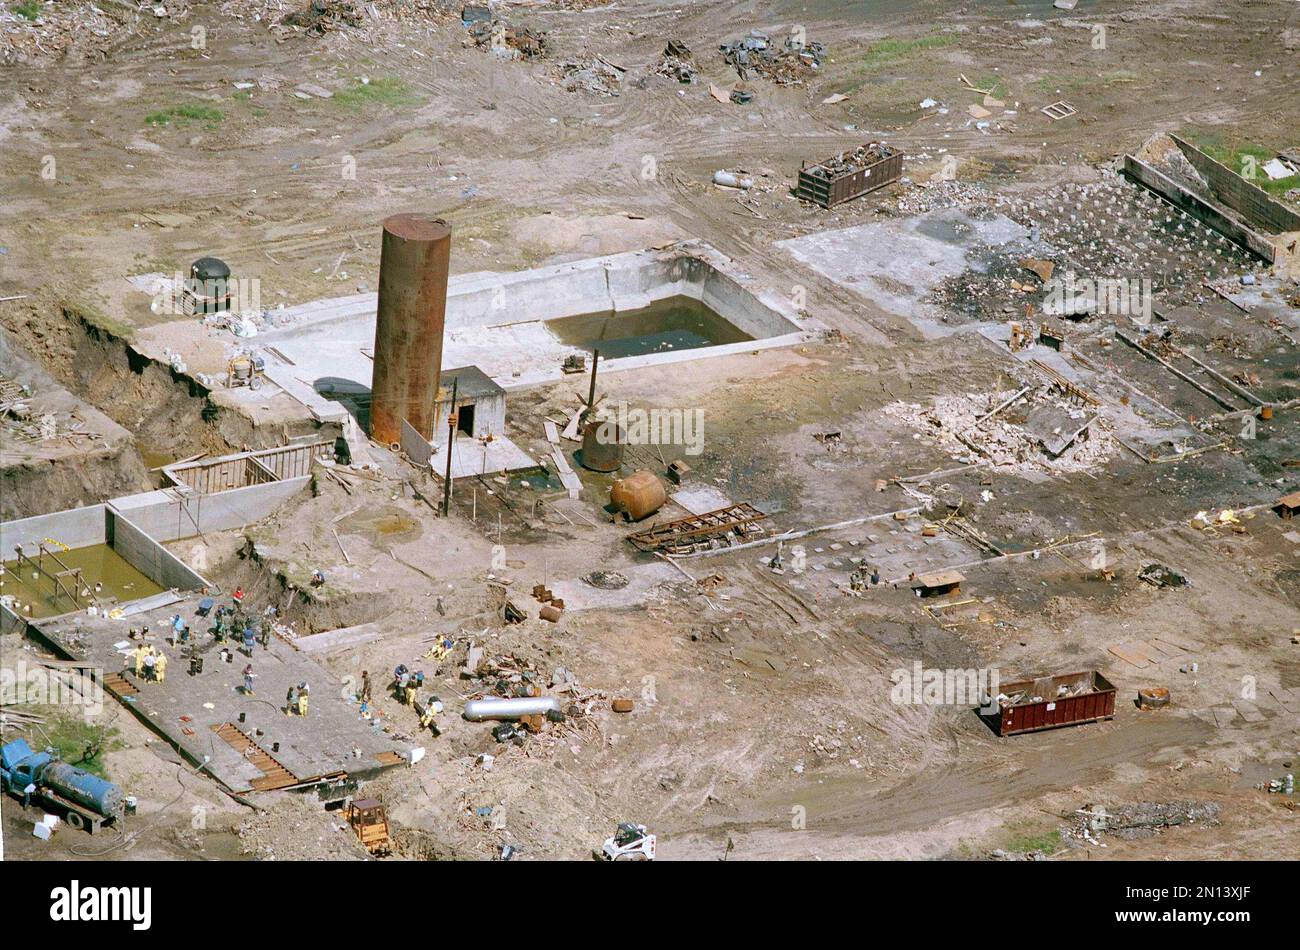 Investigators continue their search for evidence a the Branch Davidian compound near Waco, Texas, May 4, 1993, focusing on an underground room, bottom left. The bodies of 72 people including cult leader David Koresh, have been removed so far. (AP Photo/Ron Heflin) Stock Photo